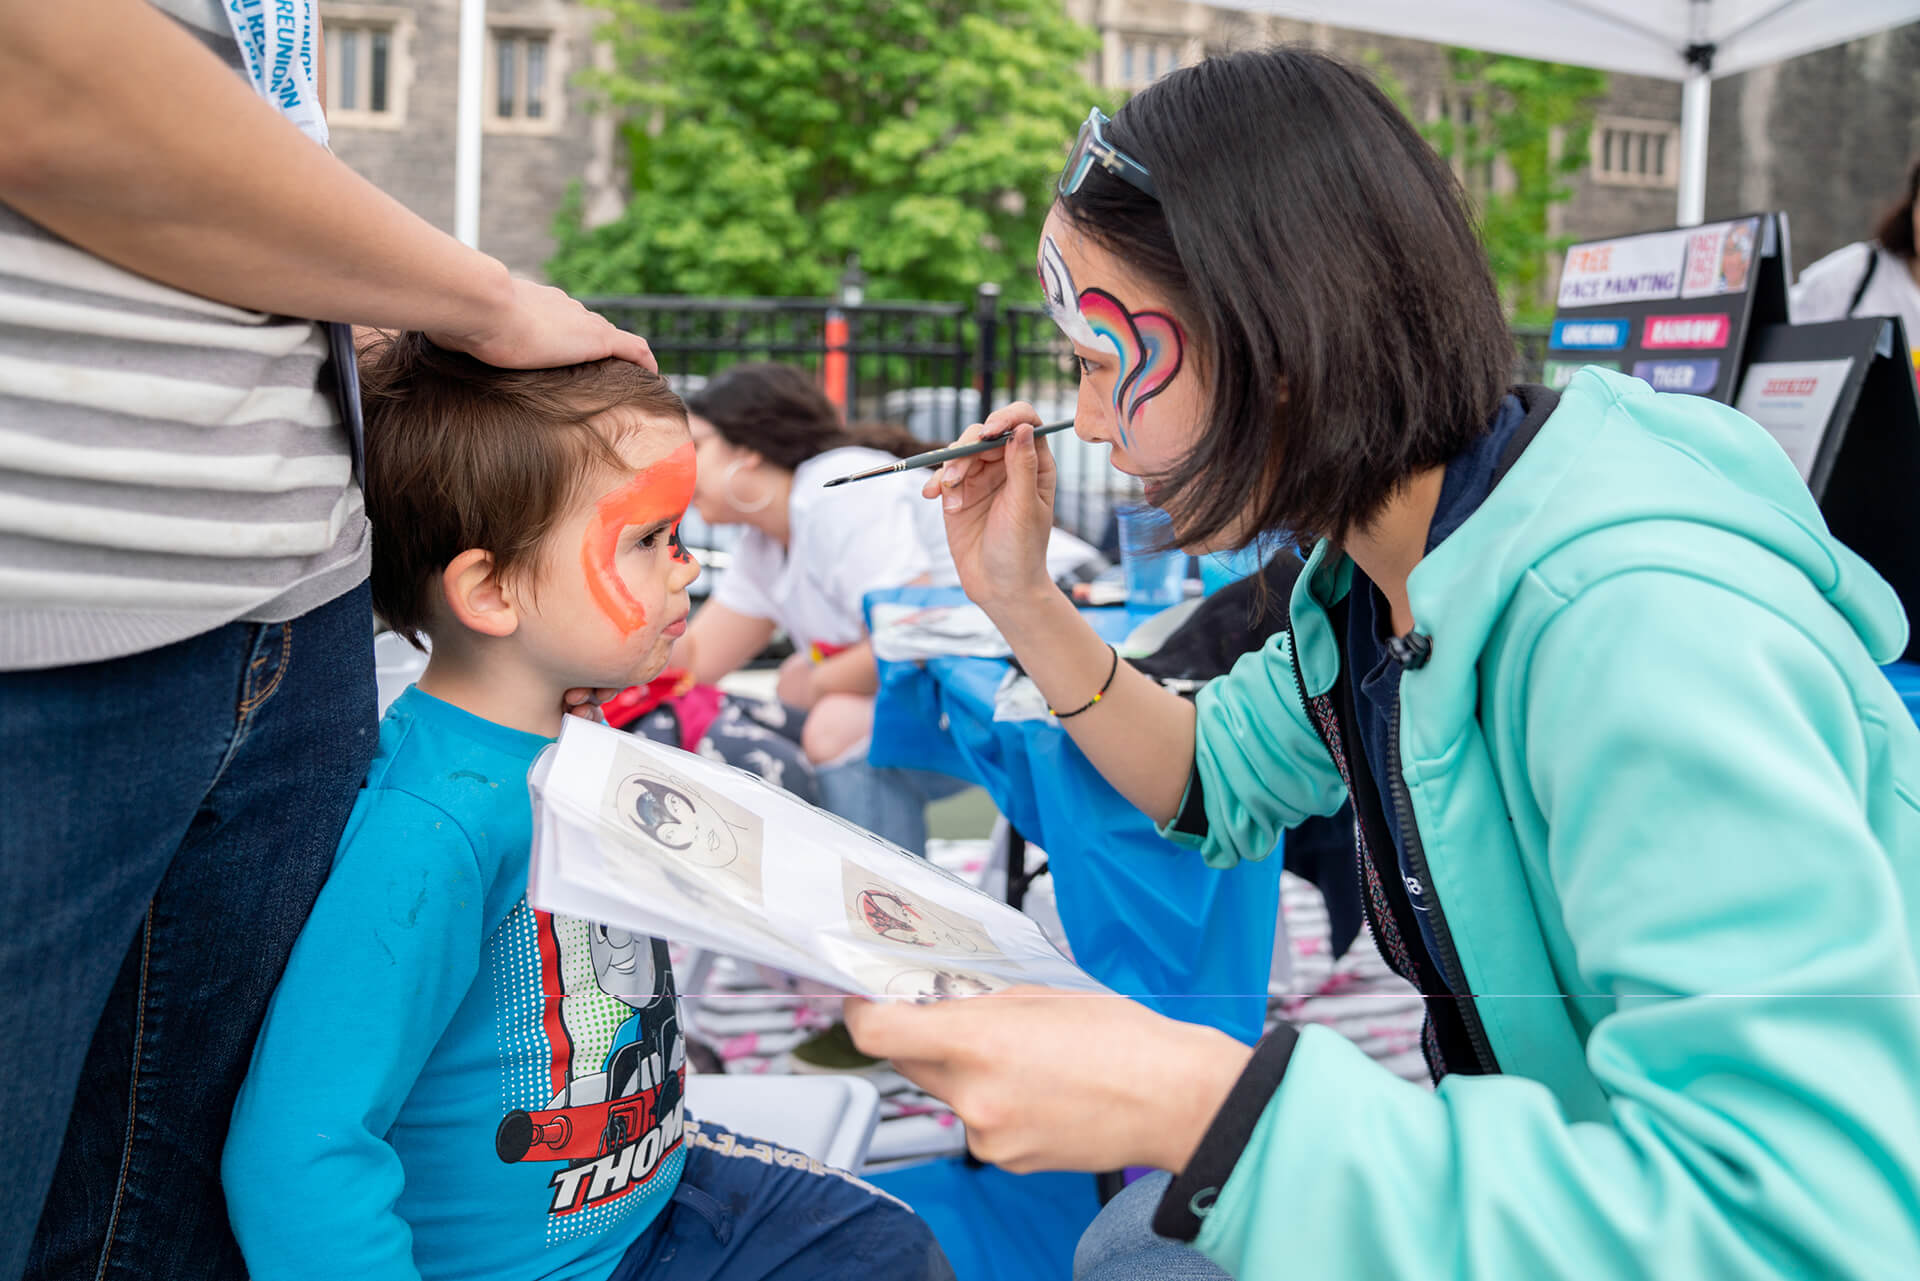 a volunteer with painted face is sitting and painting a kid's face